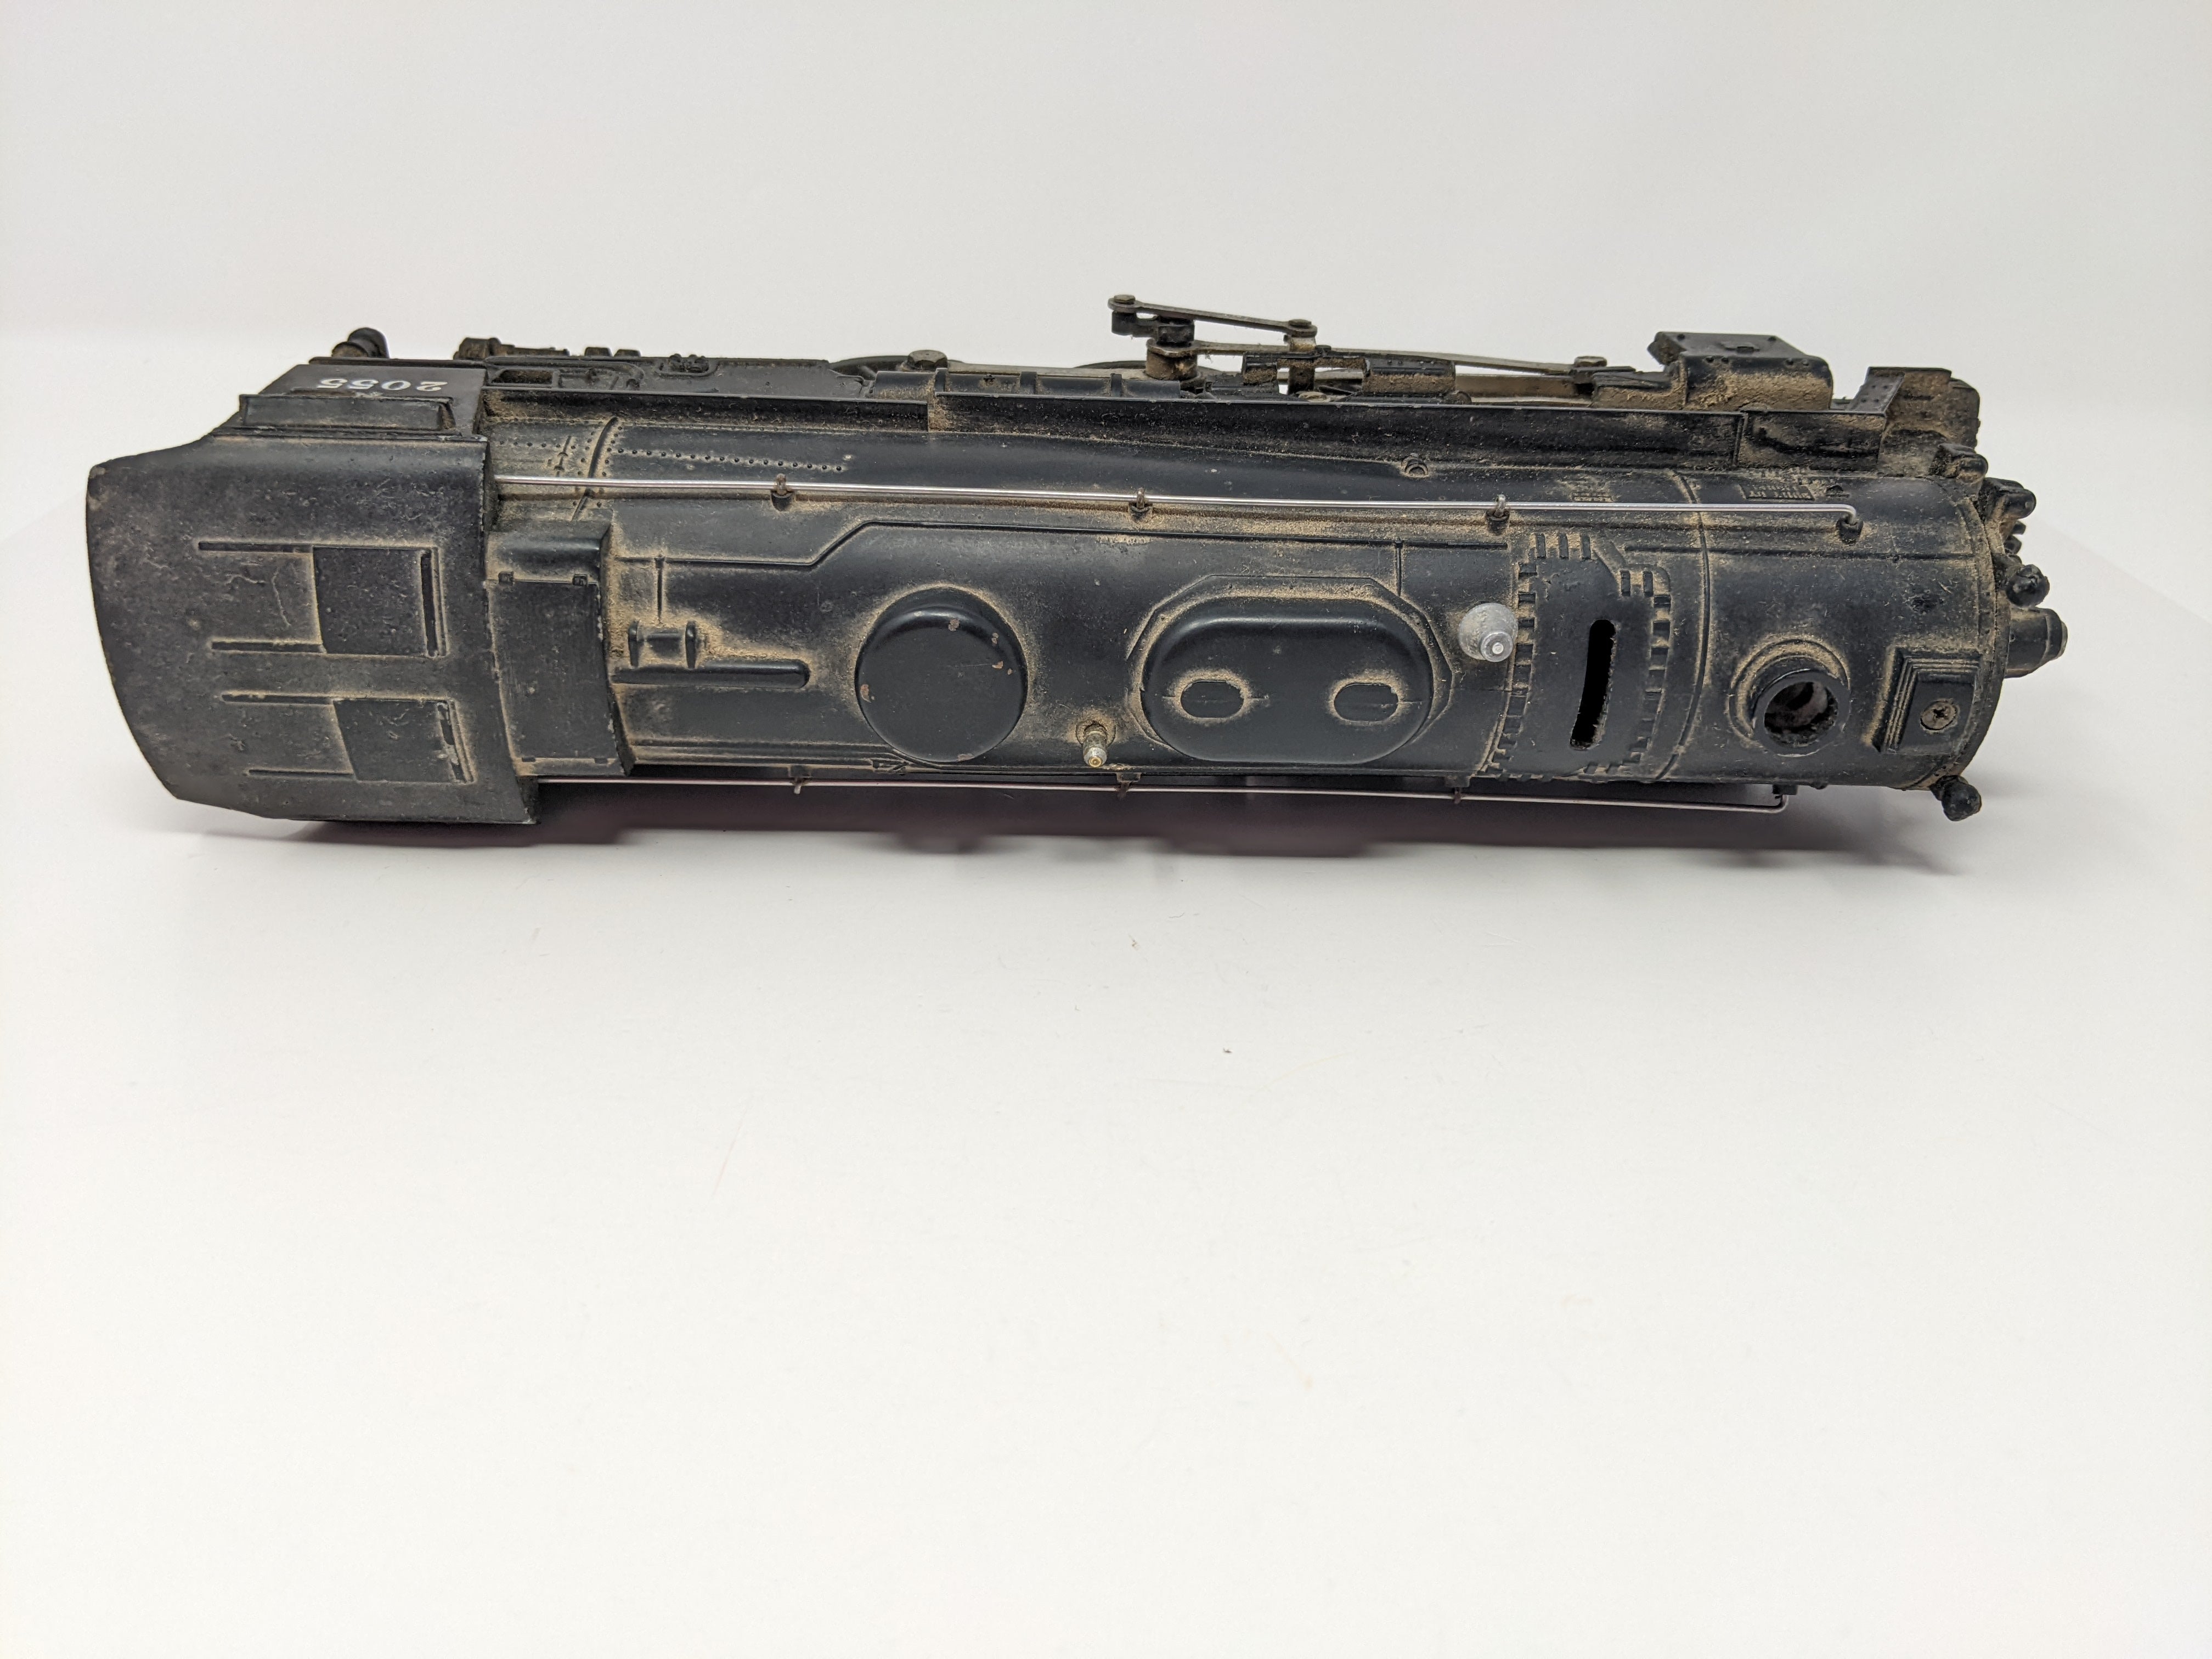 USED Lionel O, Steam Locomotive (For Parts or Repair)#2055